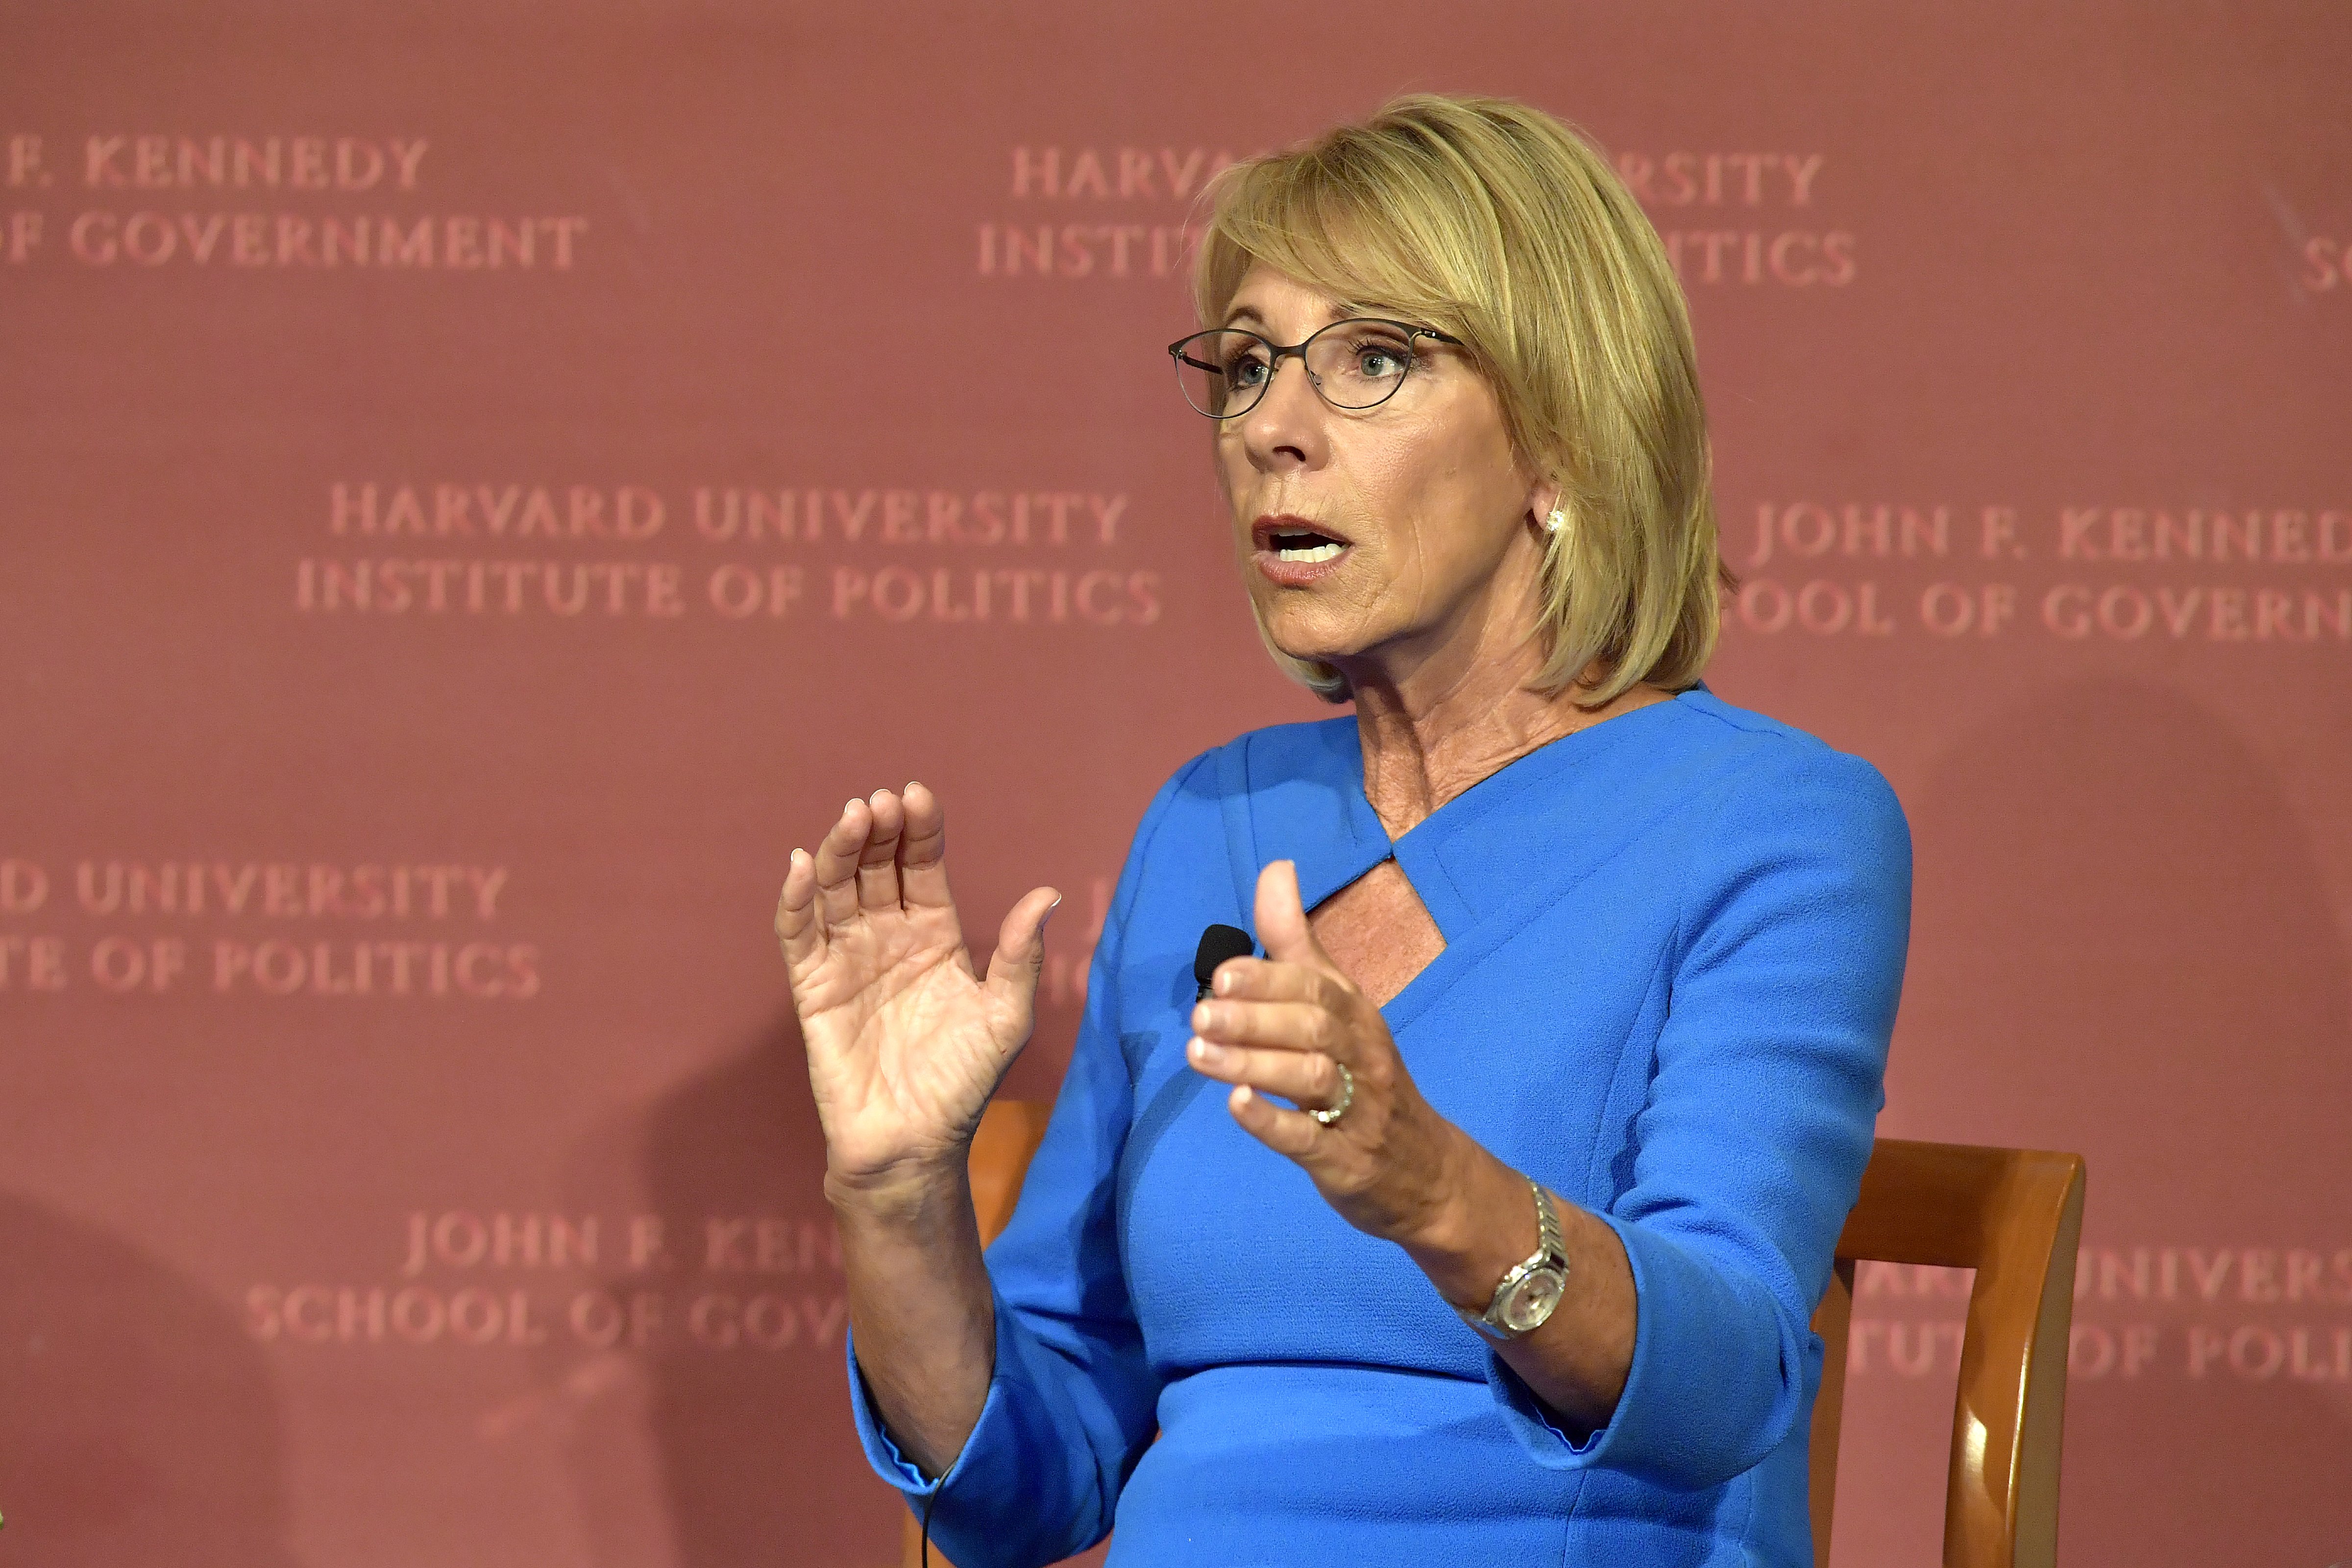 Education Secretary Betsy DeVos speaks at the Harvard University John F. Kennedy Jr. Forum on "A Conversation On Empowering Parents" moderated by Paul Peterson on Sept. 28, 2017 in Cambridge, Massachusetts. (Paul Marotta/Getty Images)